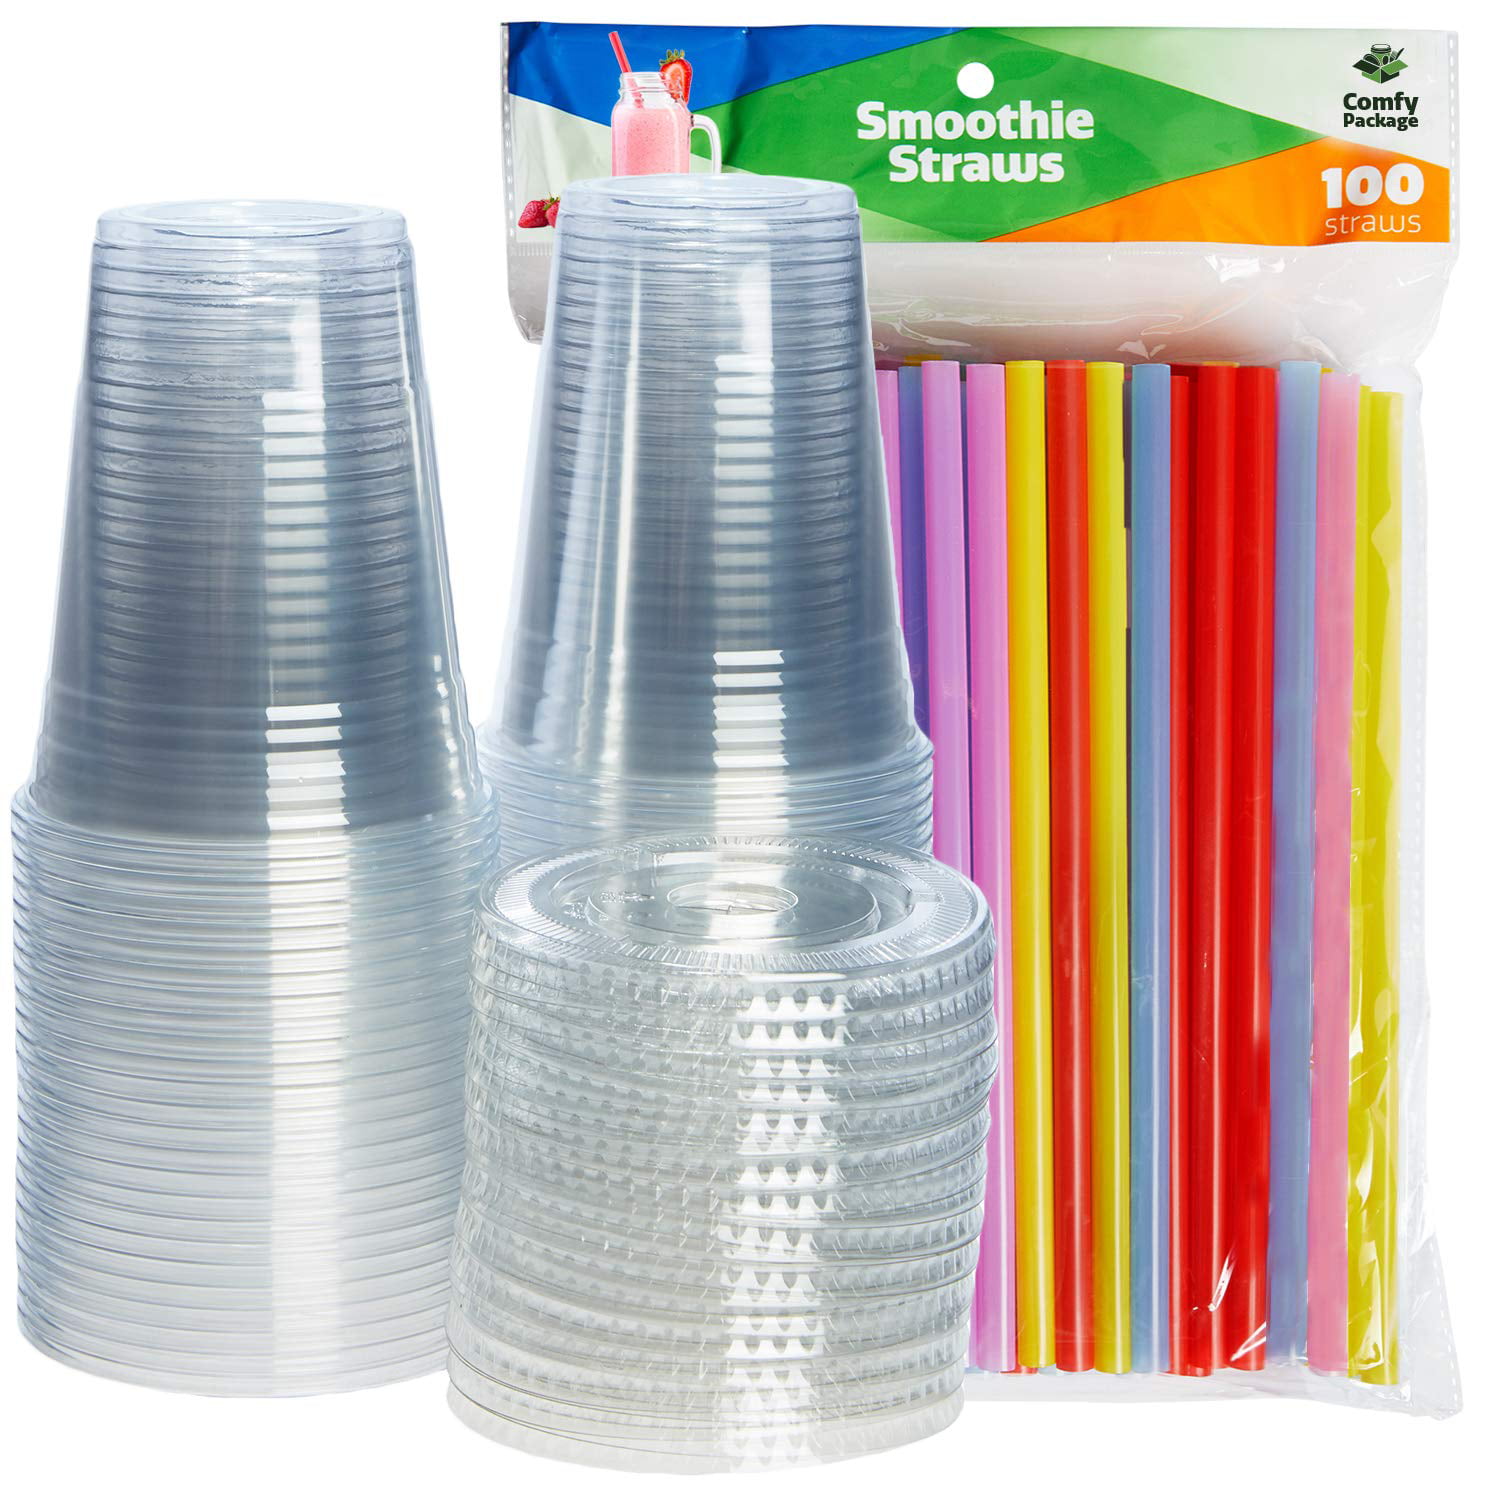 Straws INCLUDED 100 count 16 oz Clear PET Plastic Smoothie Cup with Flat Lid 